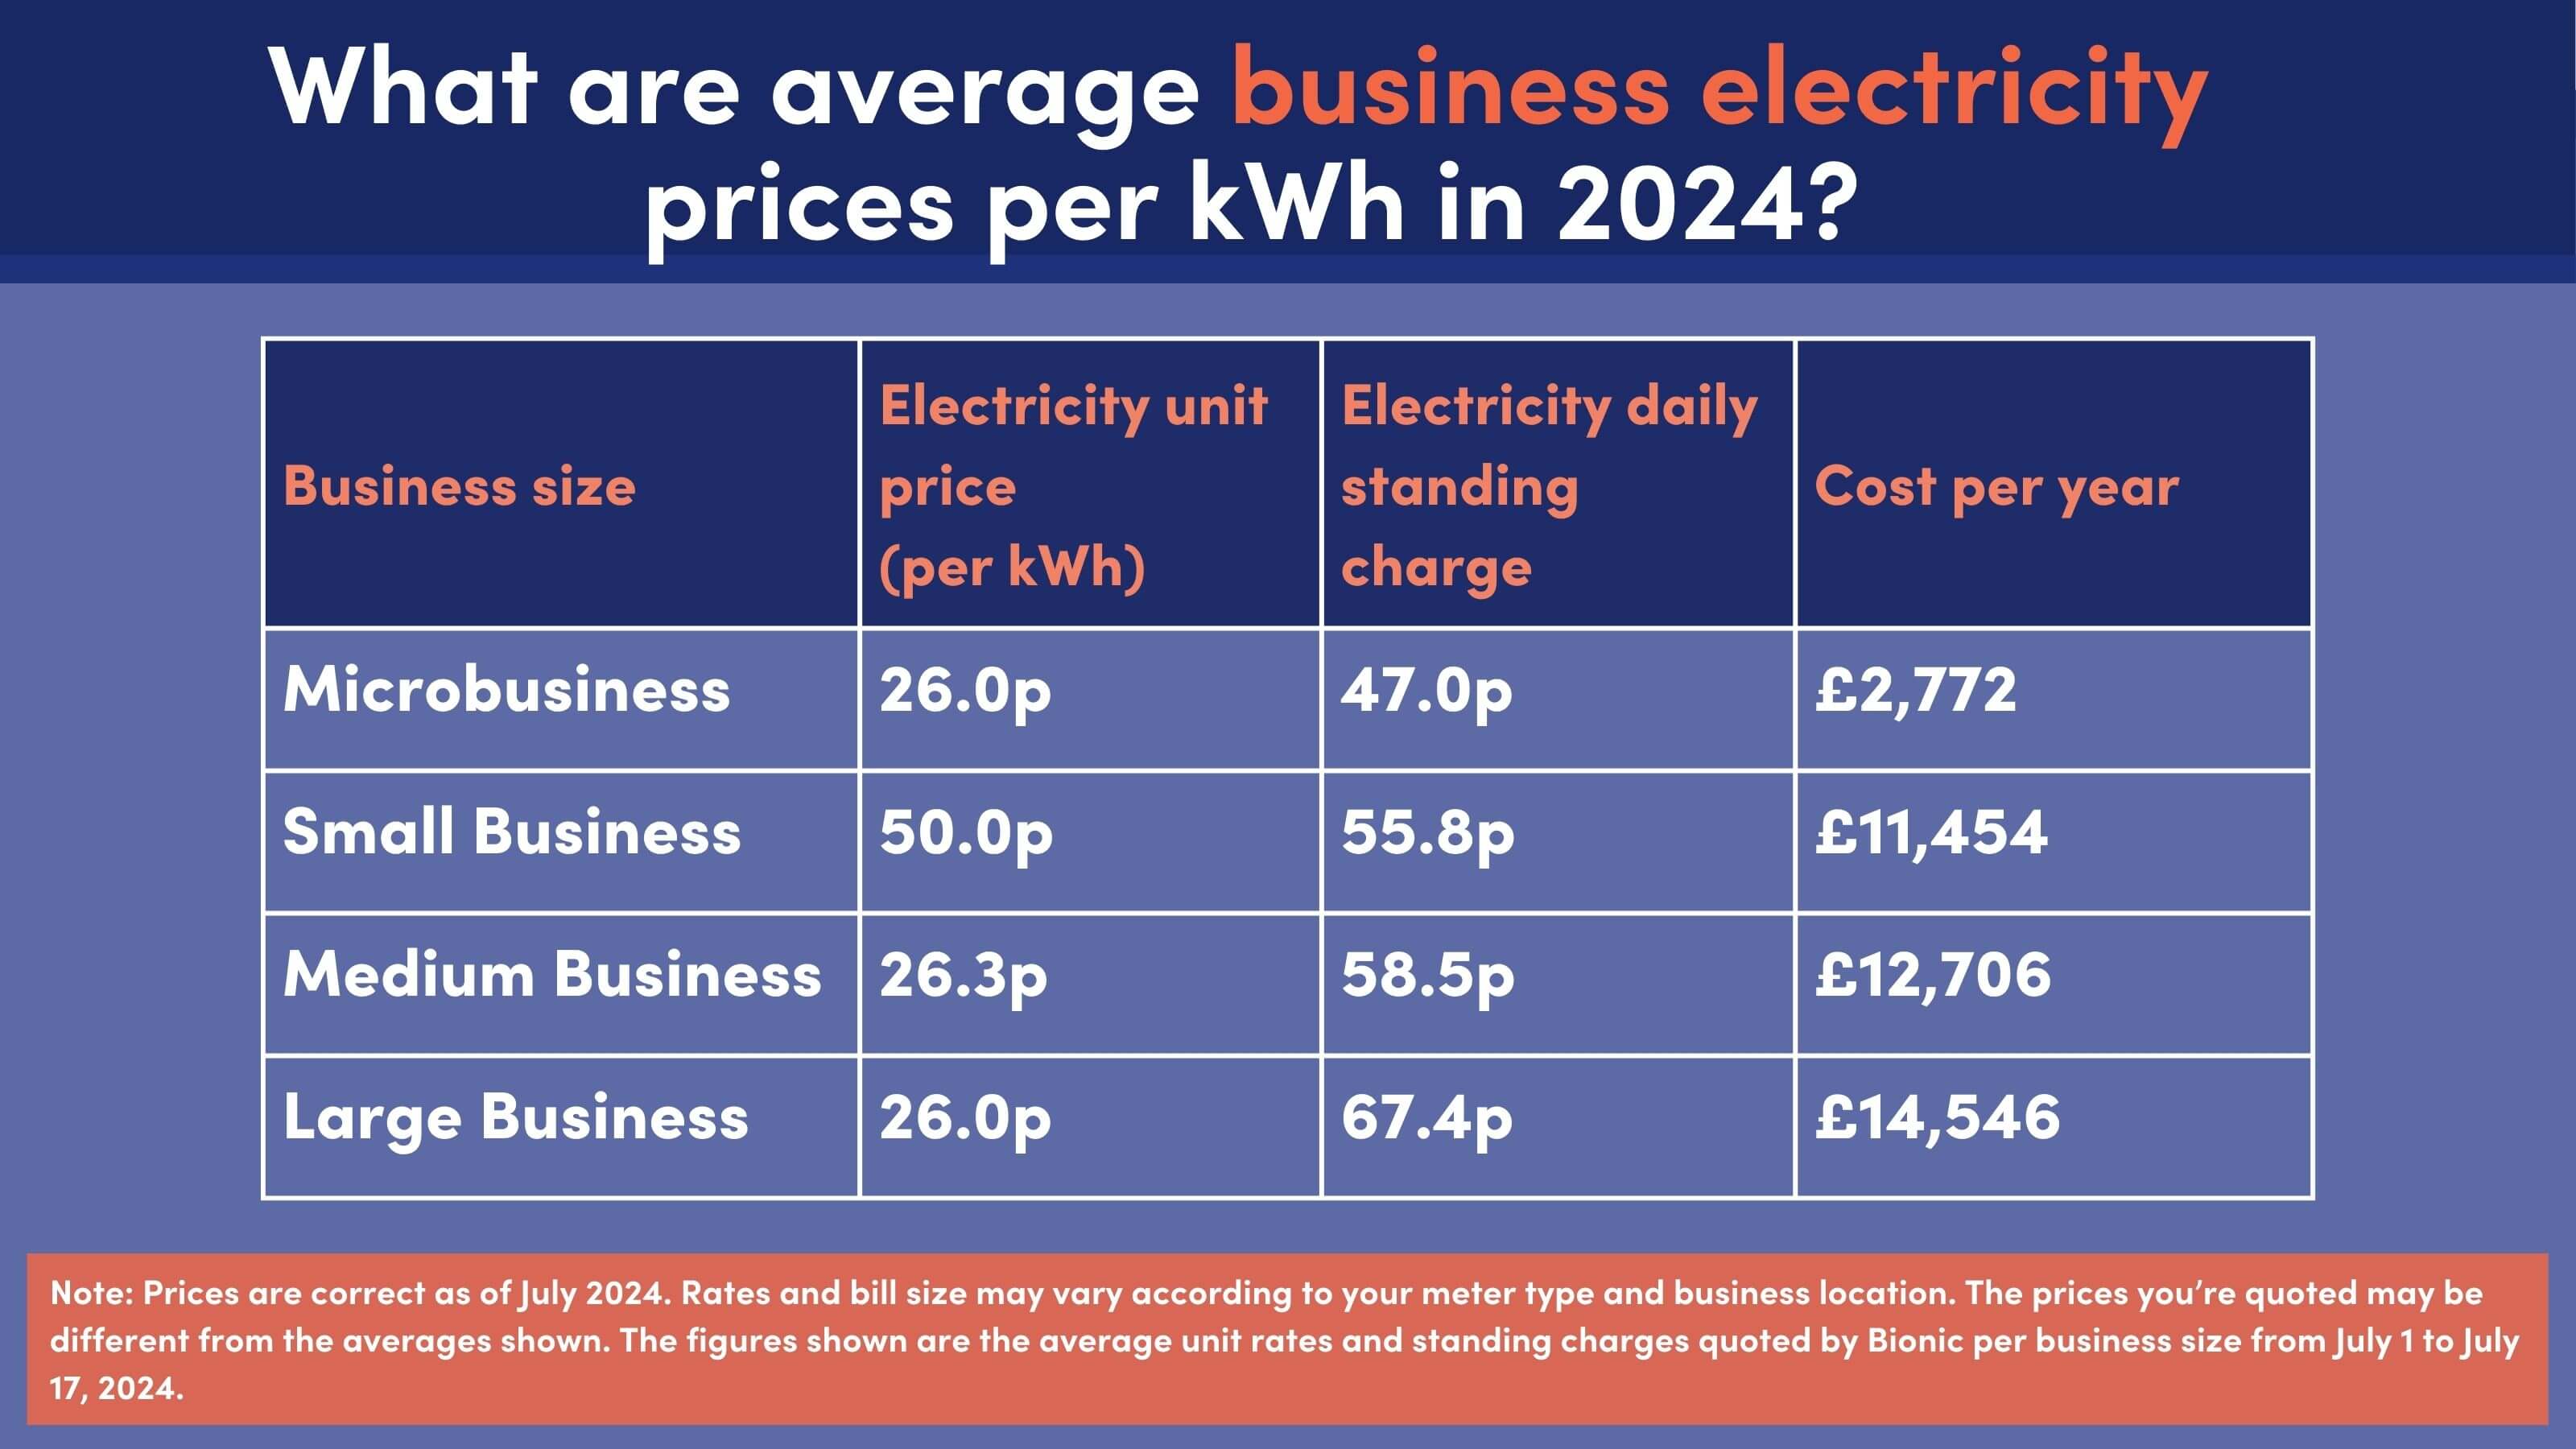 Table showing business electricity for different business types in July 2024